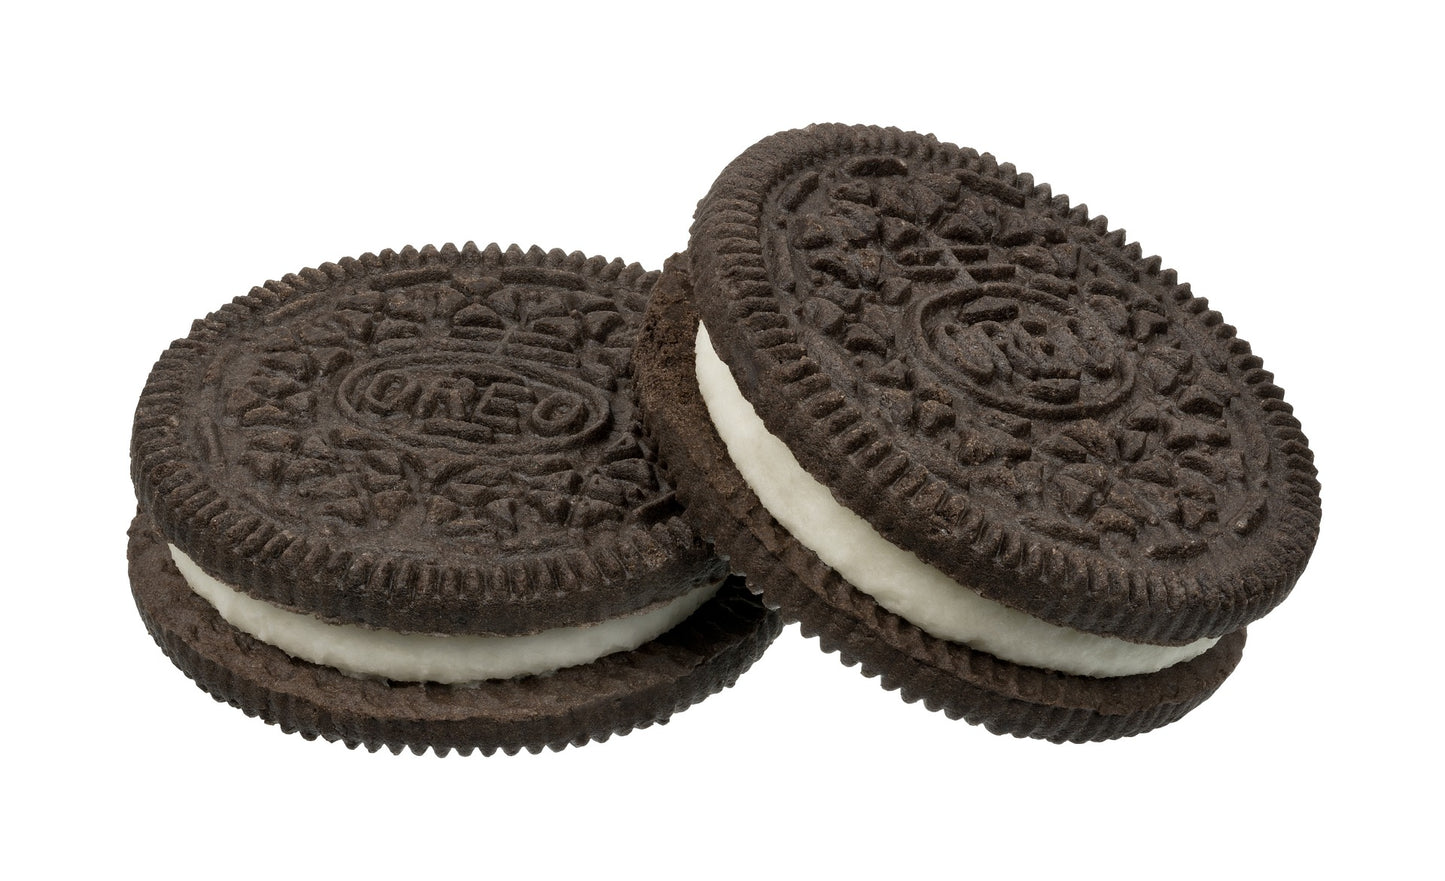 OREO COOKIES - Indulge in the delectable flavors of this package of sandwich cookies. Bursting with rich chocolate wafers, creamy filling, and sweet vanilla, each bite is an irresistible treat!  Available in Perfume Oil & Body Spray